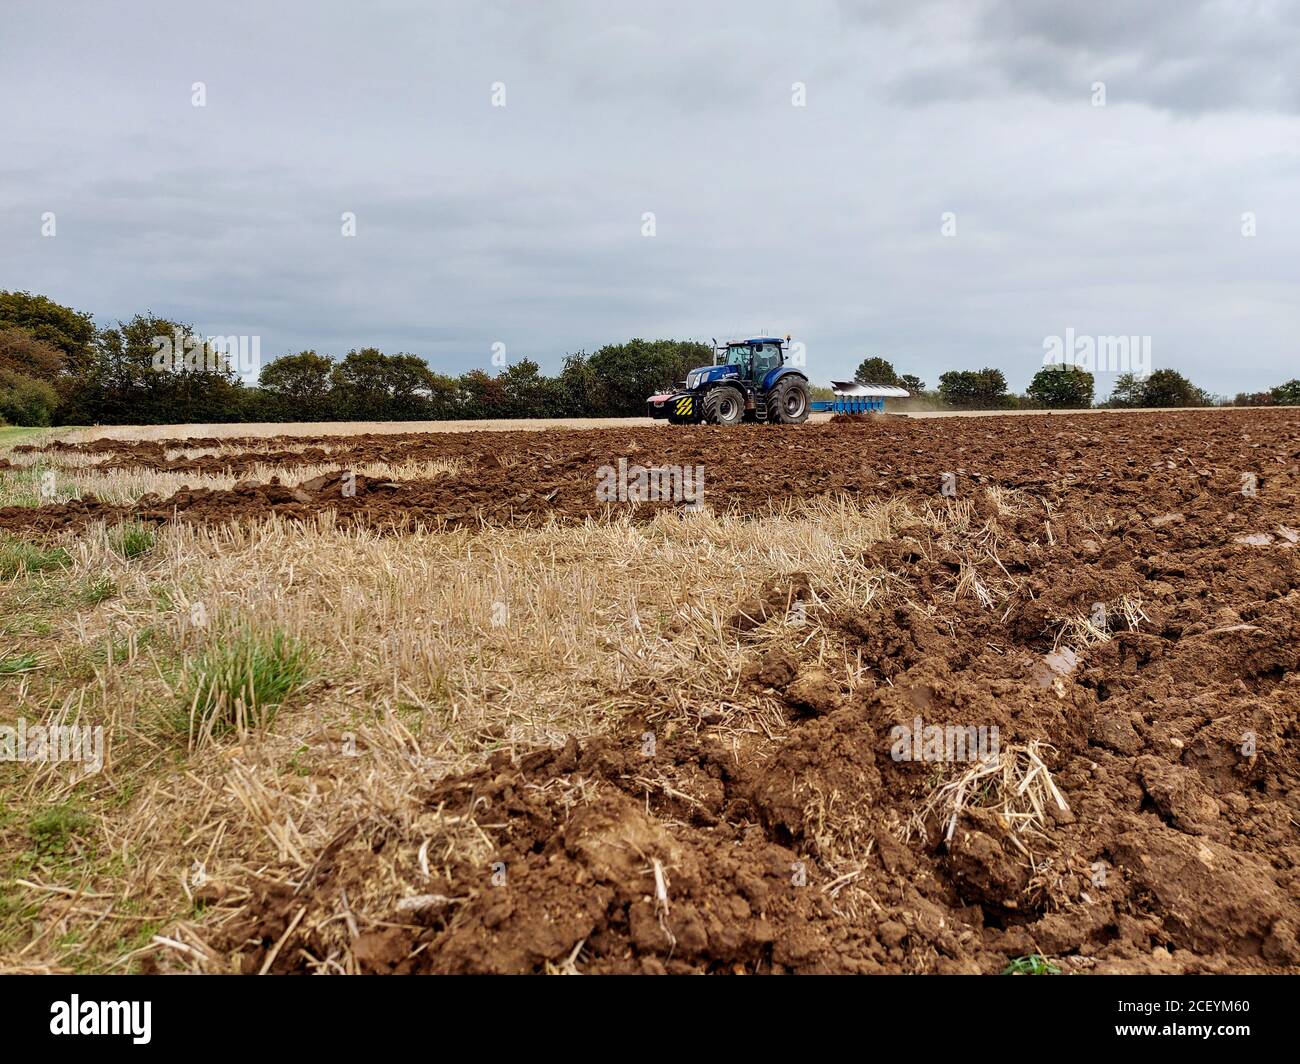 Tractor and Plough working in a field at harvest time Stock Photo